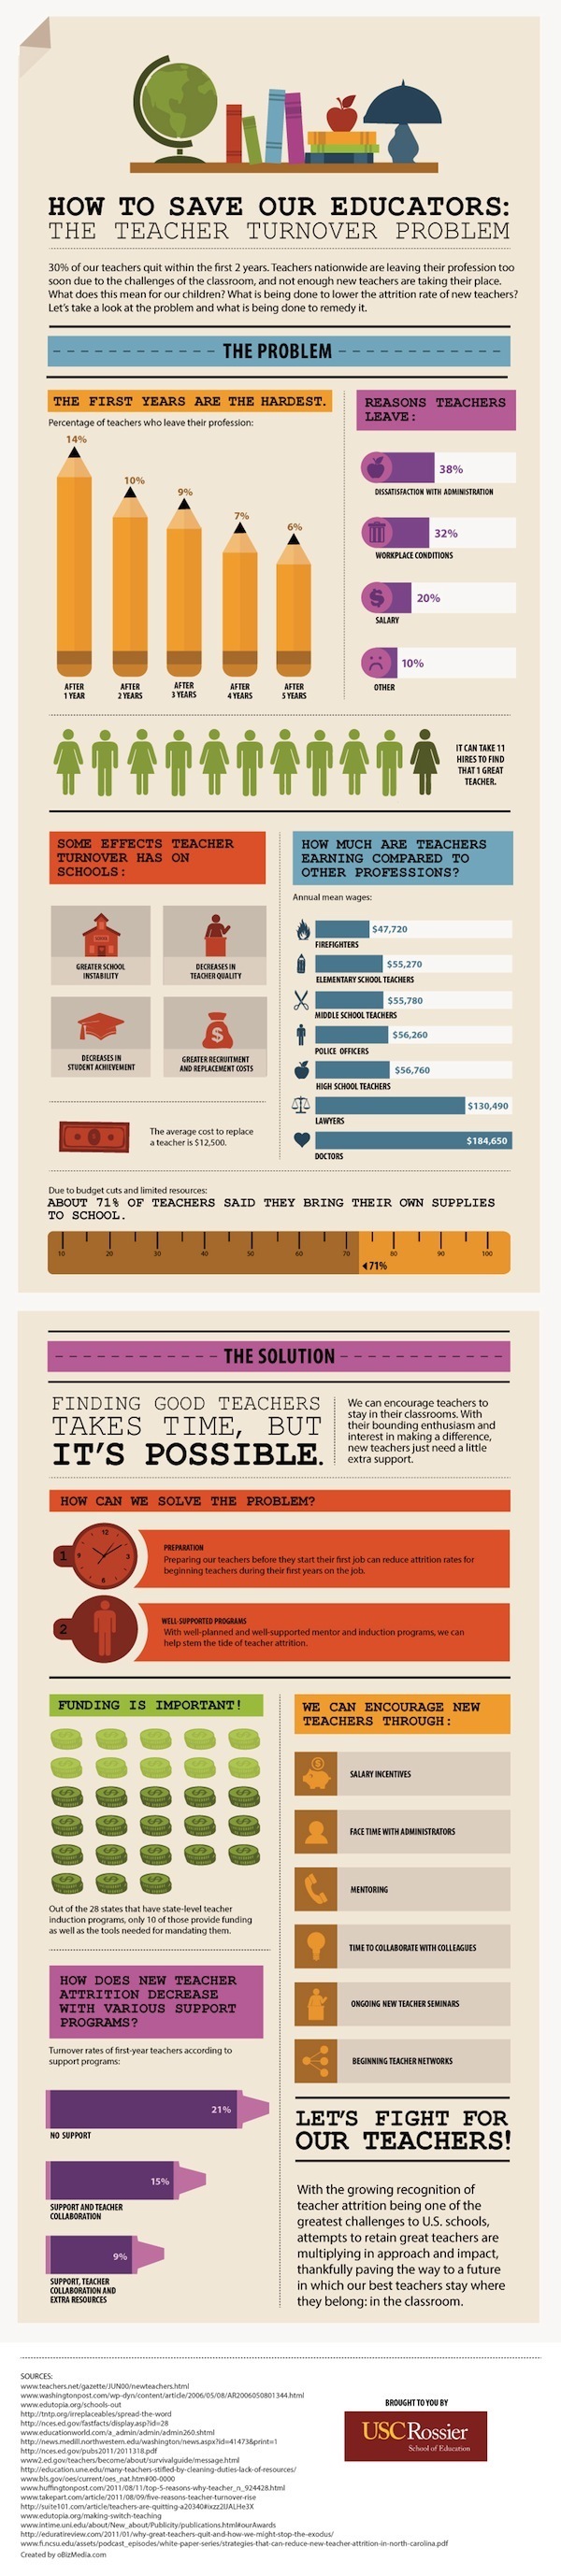 The Teacher Turnover Problem Infographic